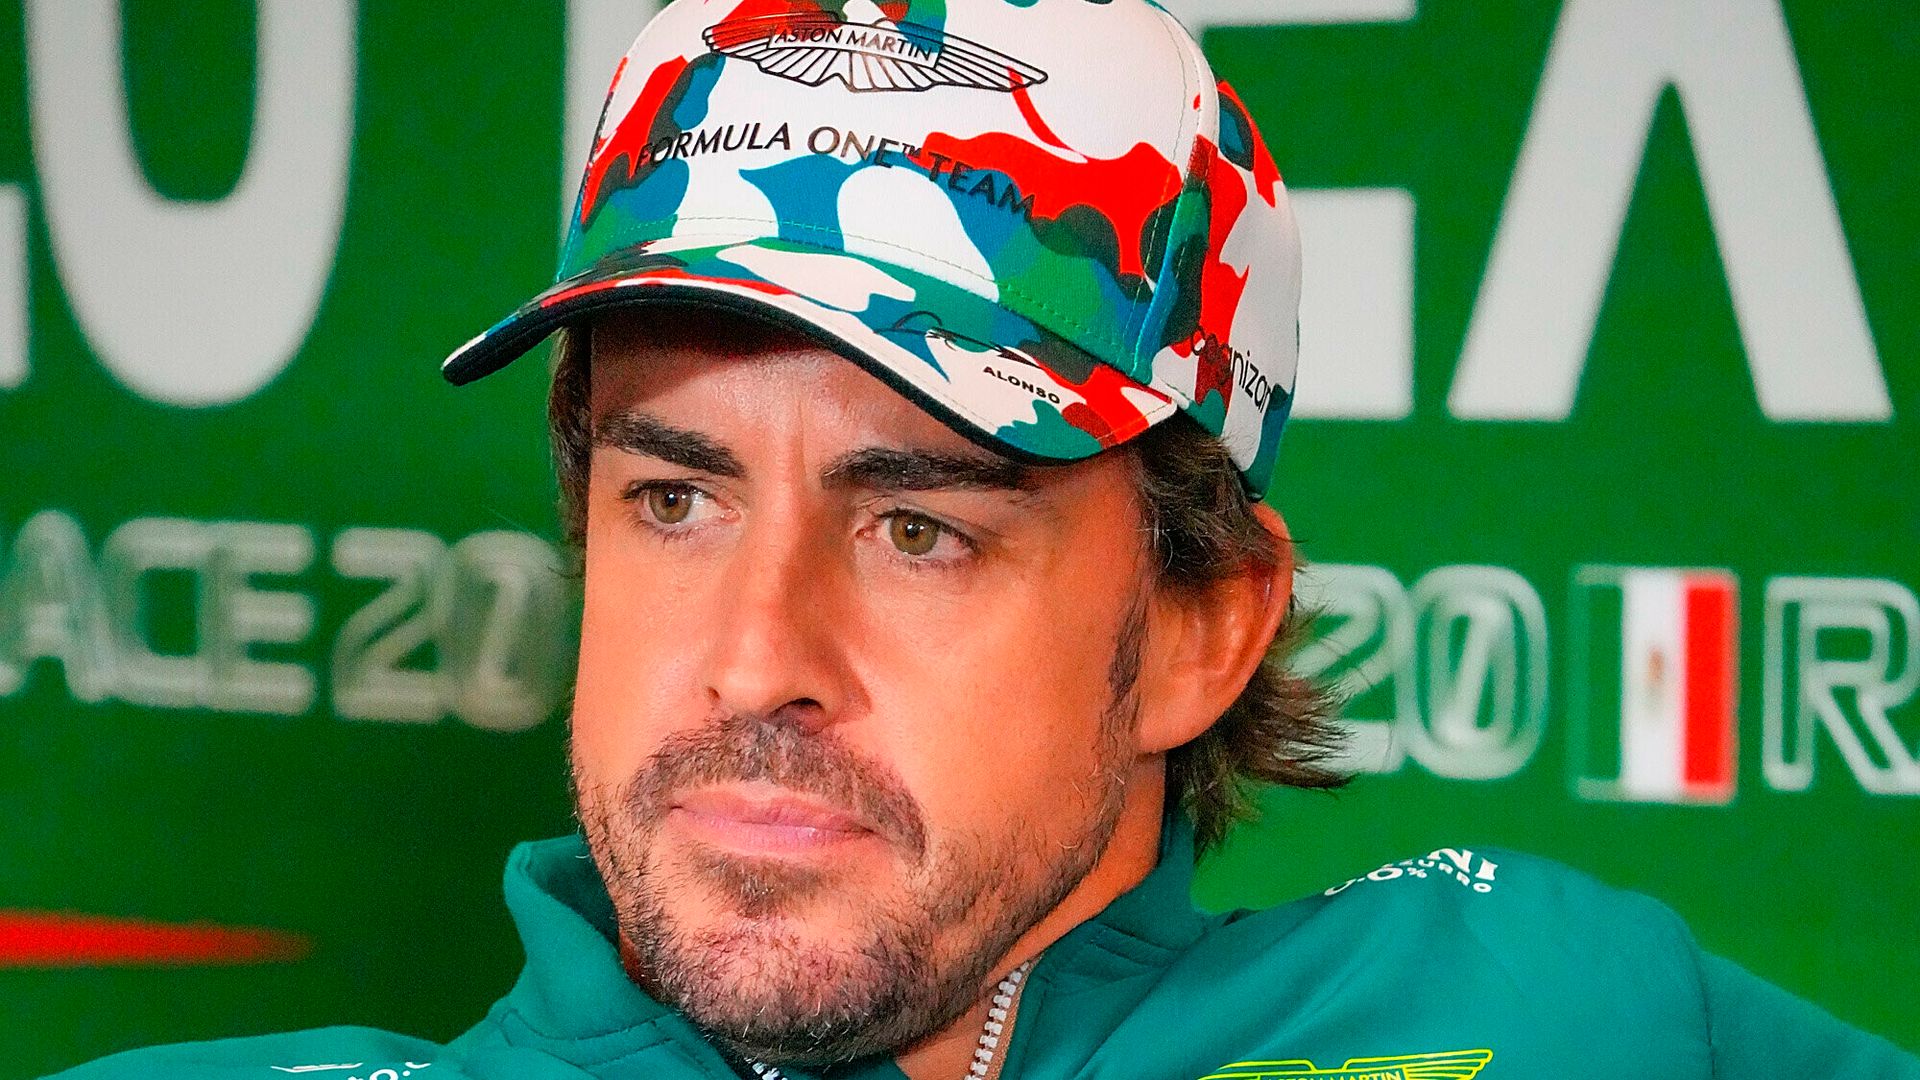 'It's not funny' - Alonso promises 'consequences' over Red Bull rumours